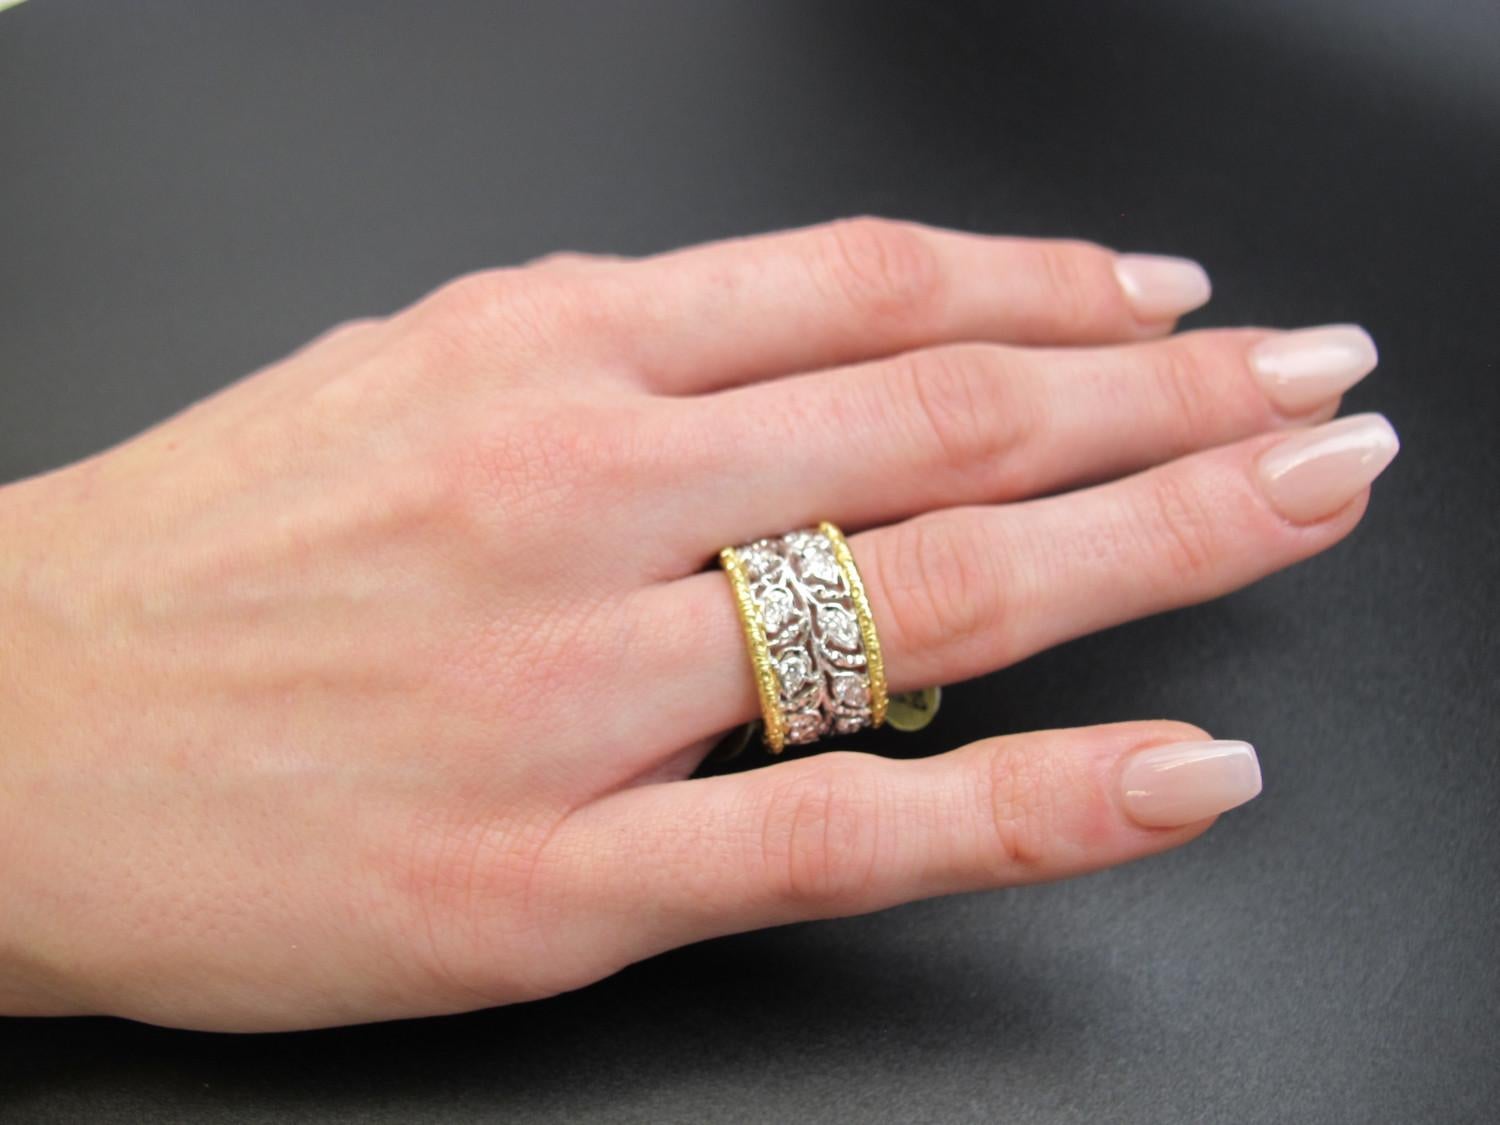 Round Cut Italian Florentine Eternity Band with Diamonds in White and Yellow Gold 